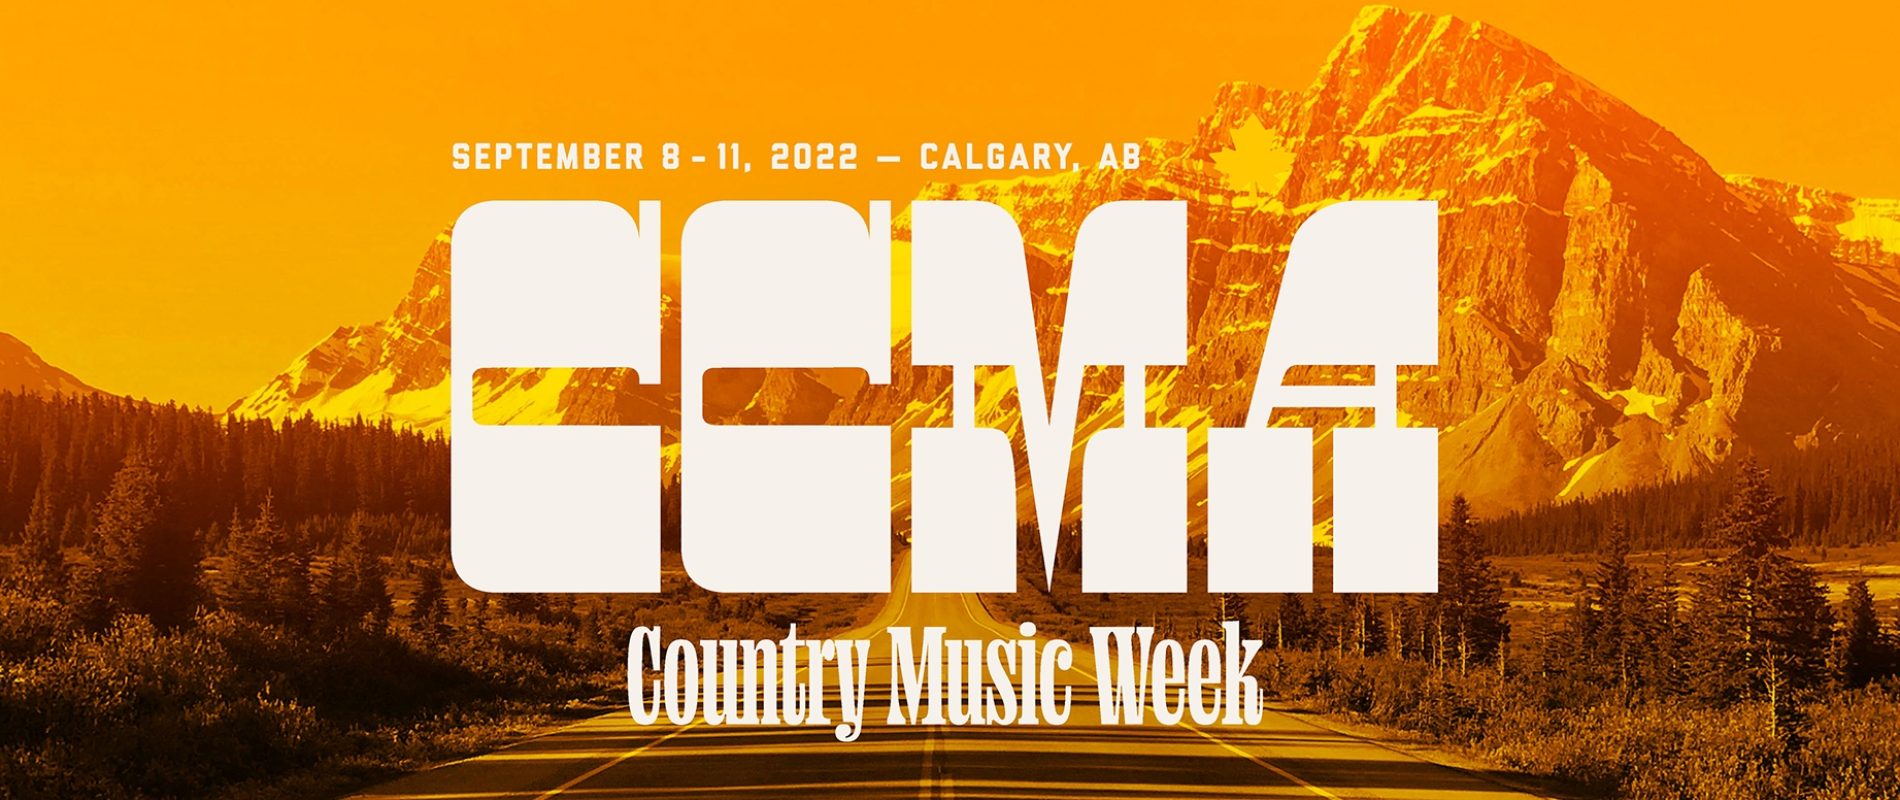 CCMA Country Music Week 2022